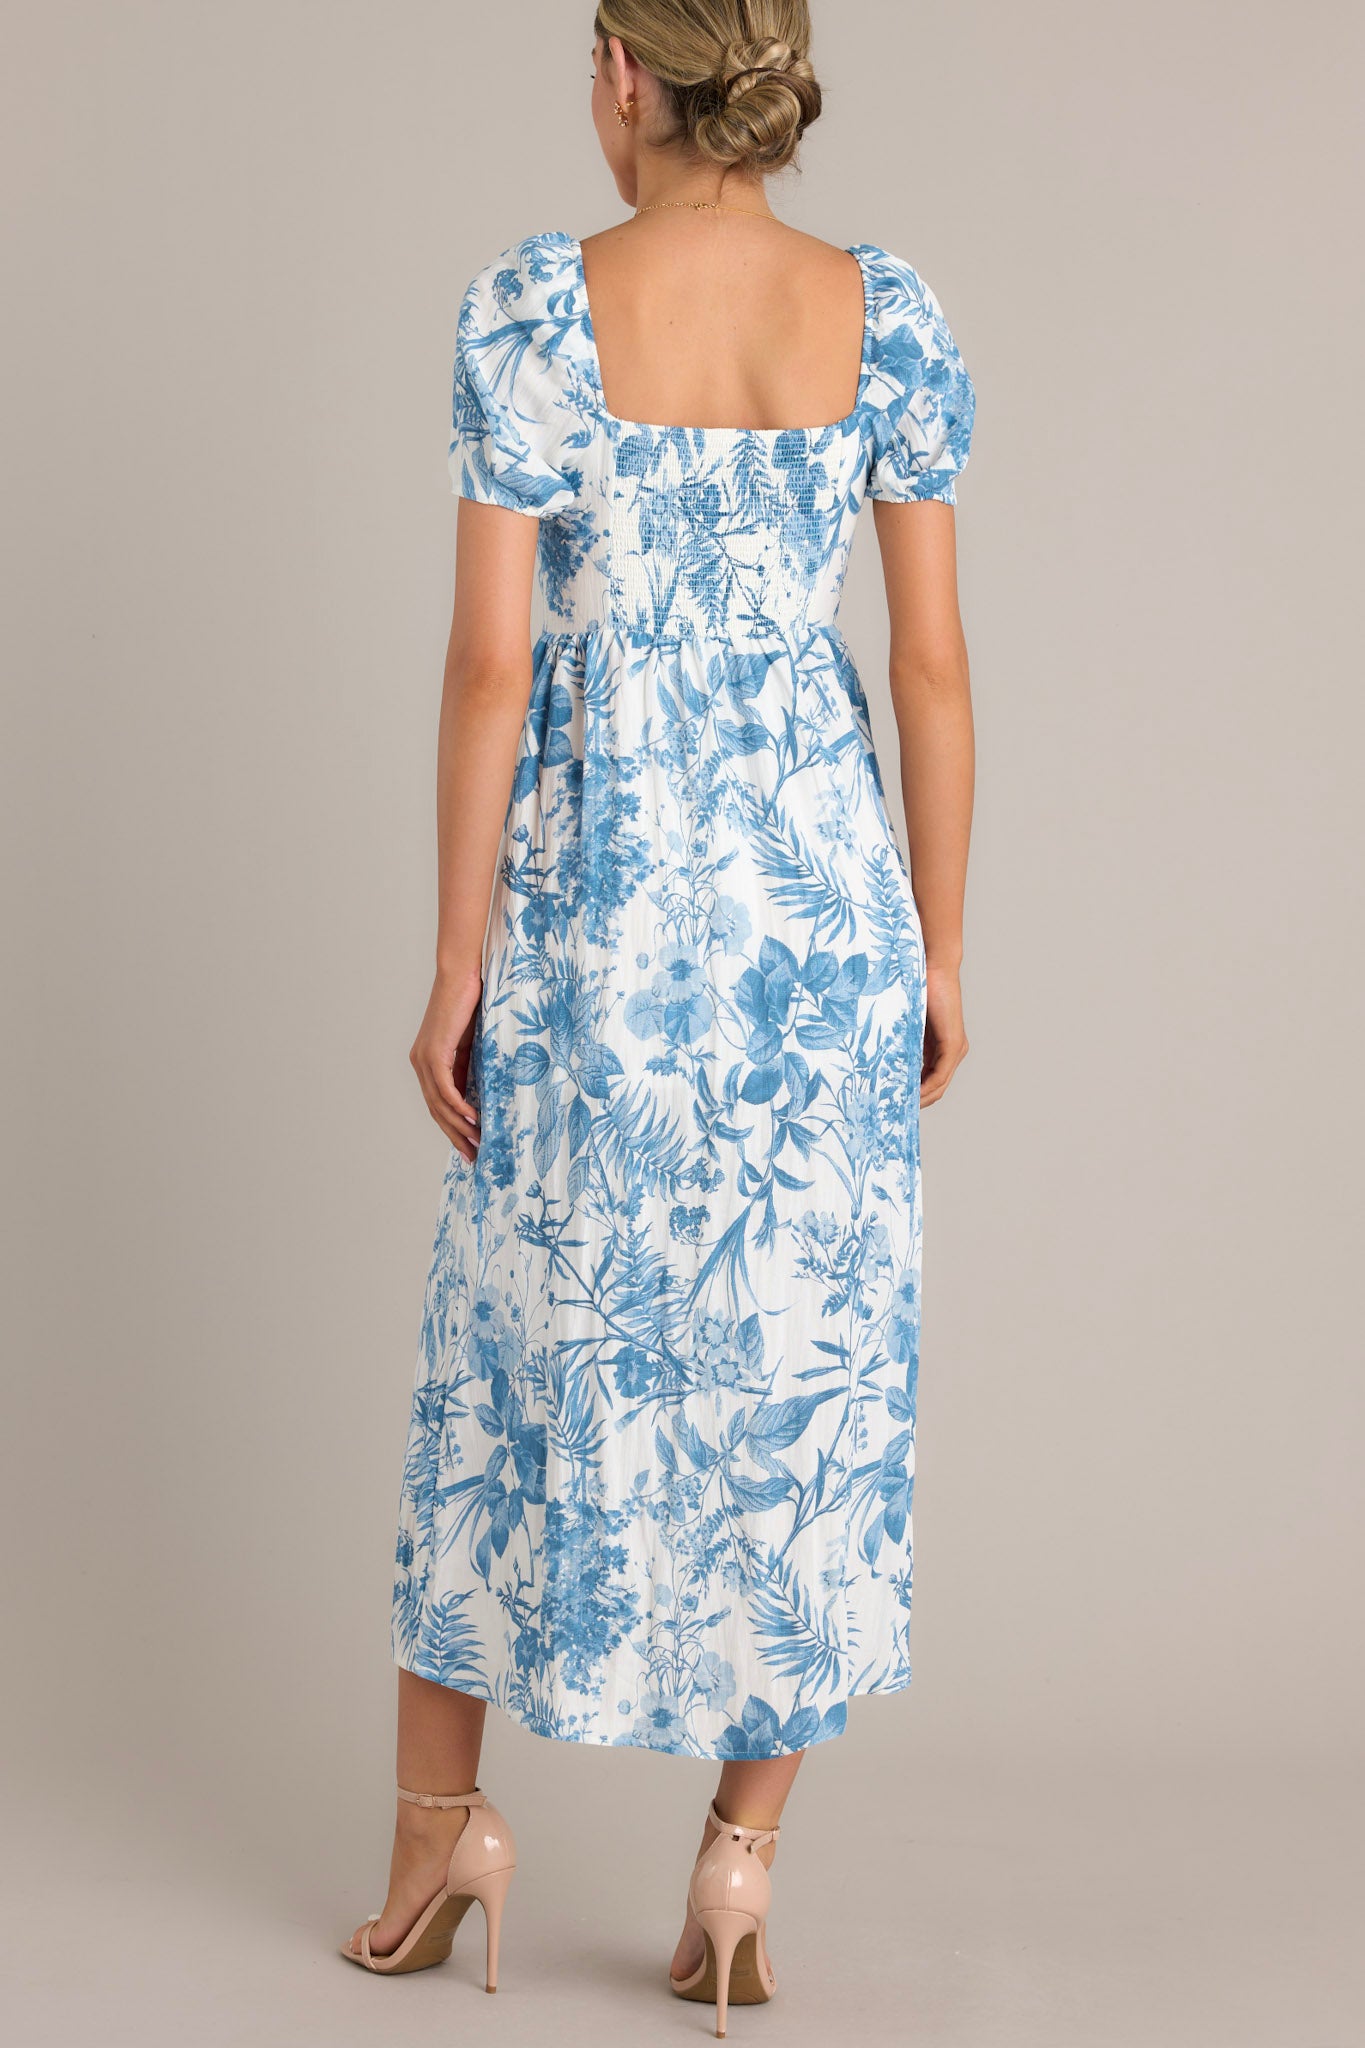 Back view of this blue floral midi dress featuring short puff sleeves, a fitted bodice, cinched waist, and a mid-length skirt with a blue botanical print.